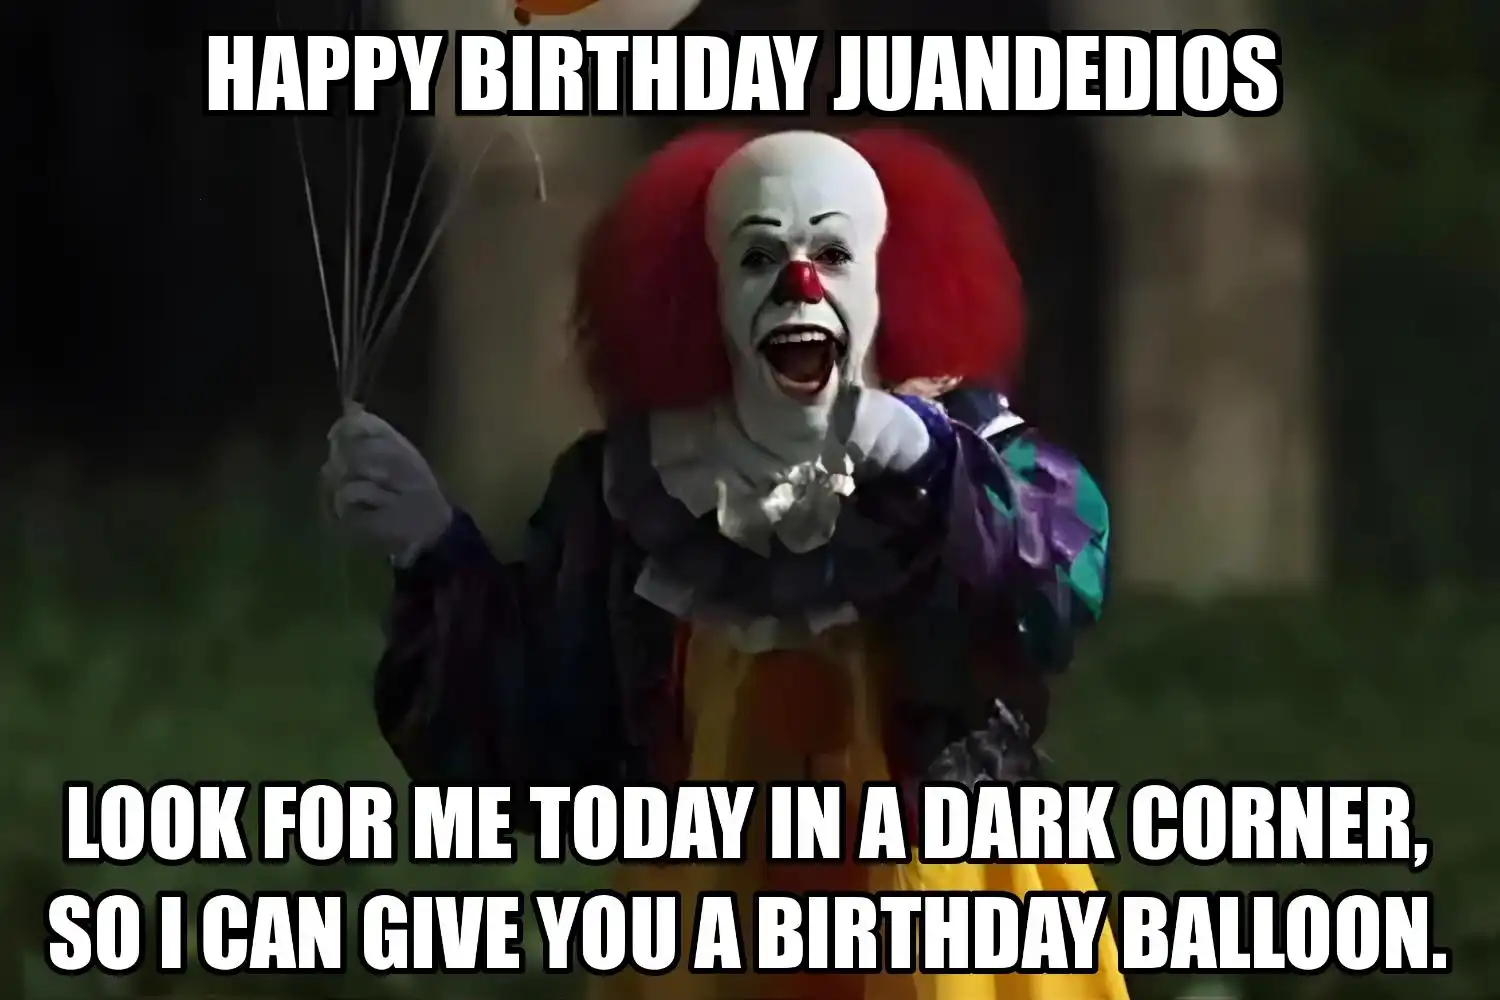 Happy Birthday Juandedios I Can Give You A Balloon Meme